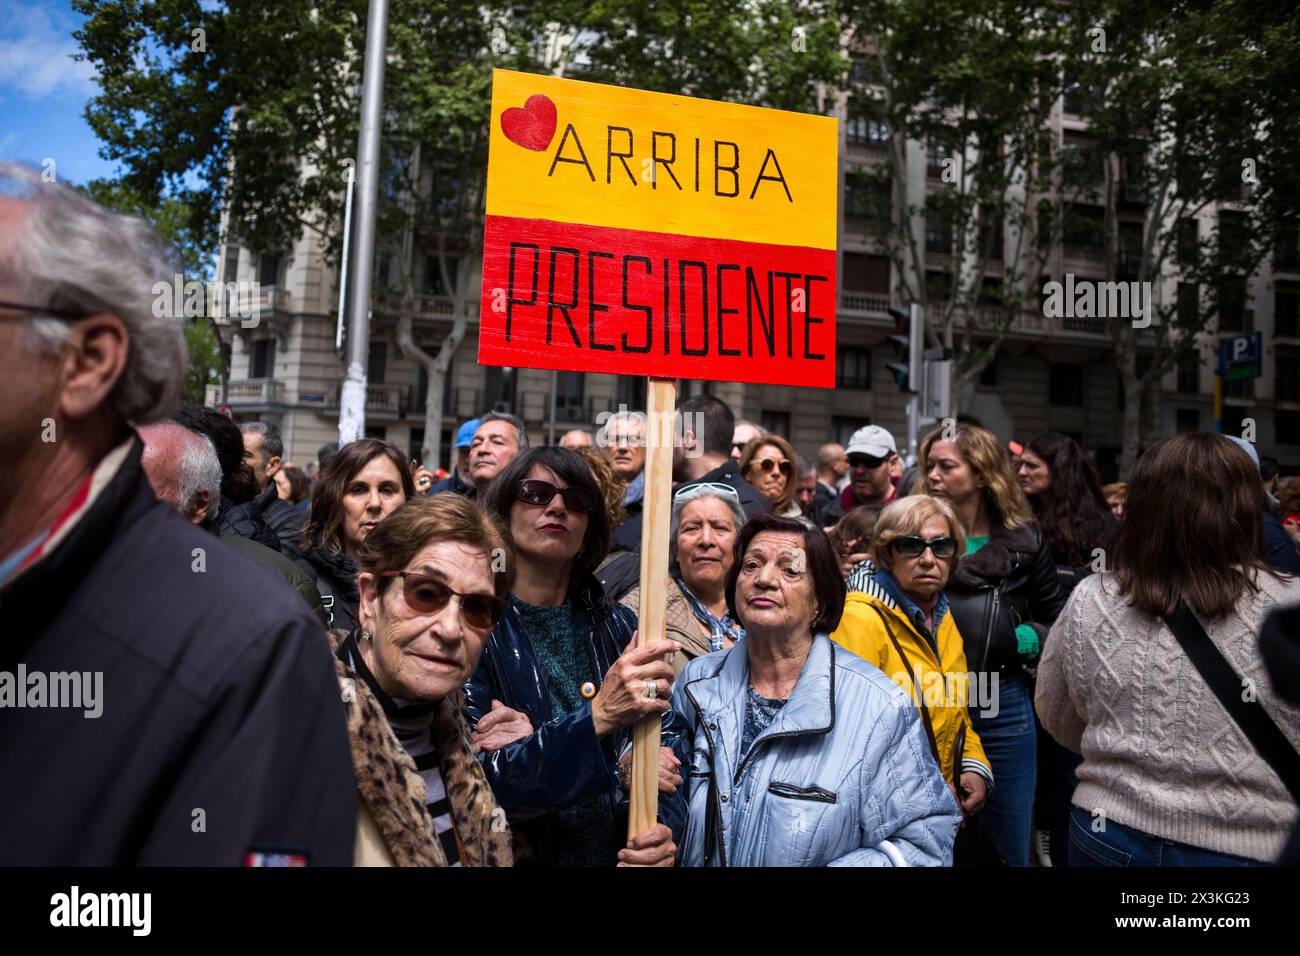 Protesters hold a placard that reads in Spanish 'Up President', during a demonstration on Ferraz Street in Madrid, in support of Pedro Sanchez to continue in the position of president of the government. Pedro Sanchez, canceled his public agenda for four days and reflects on his continuity as head of the Executive. The Federal Committee of the Spanish Socialist Workers Party (PSOE) held a meeting and demonstrated at the national headquarters on Ferraz Street in Madrid to show support for the party's general secretary and president of the Government of Spain Pedro Sanchez. Stock Photo